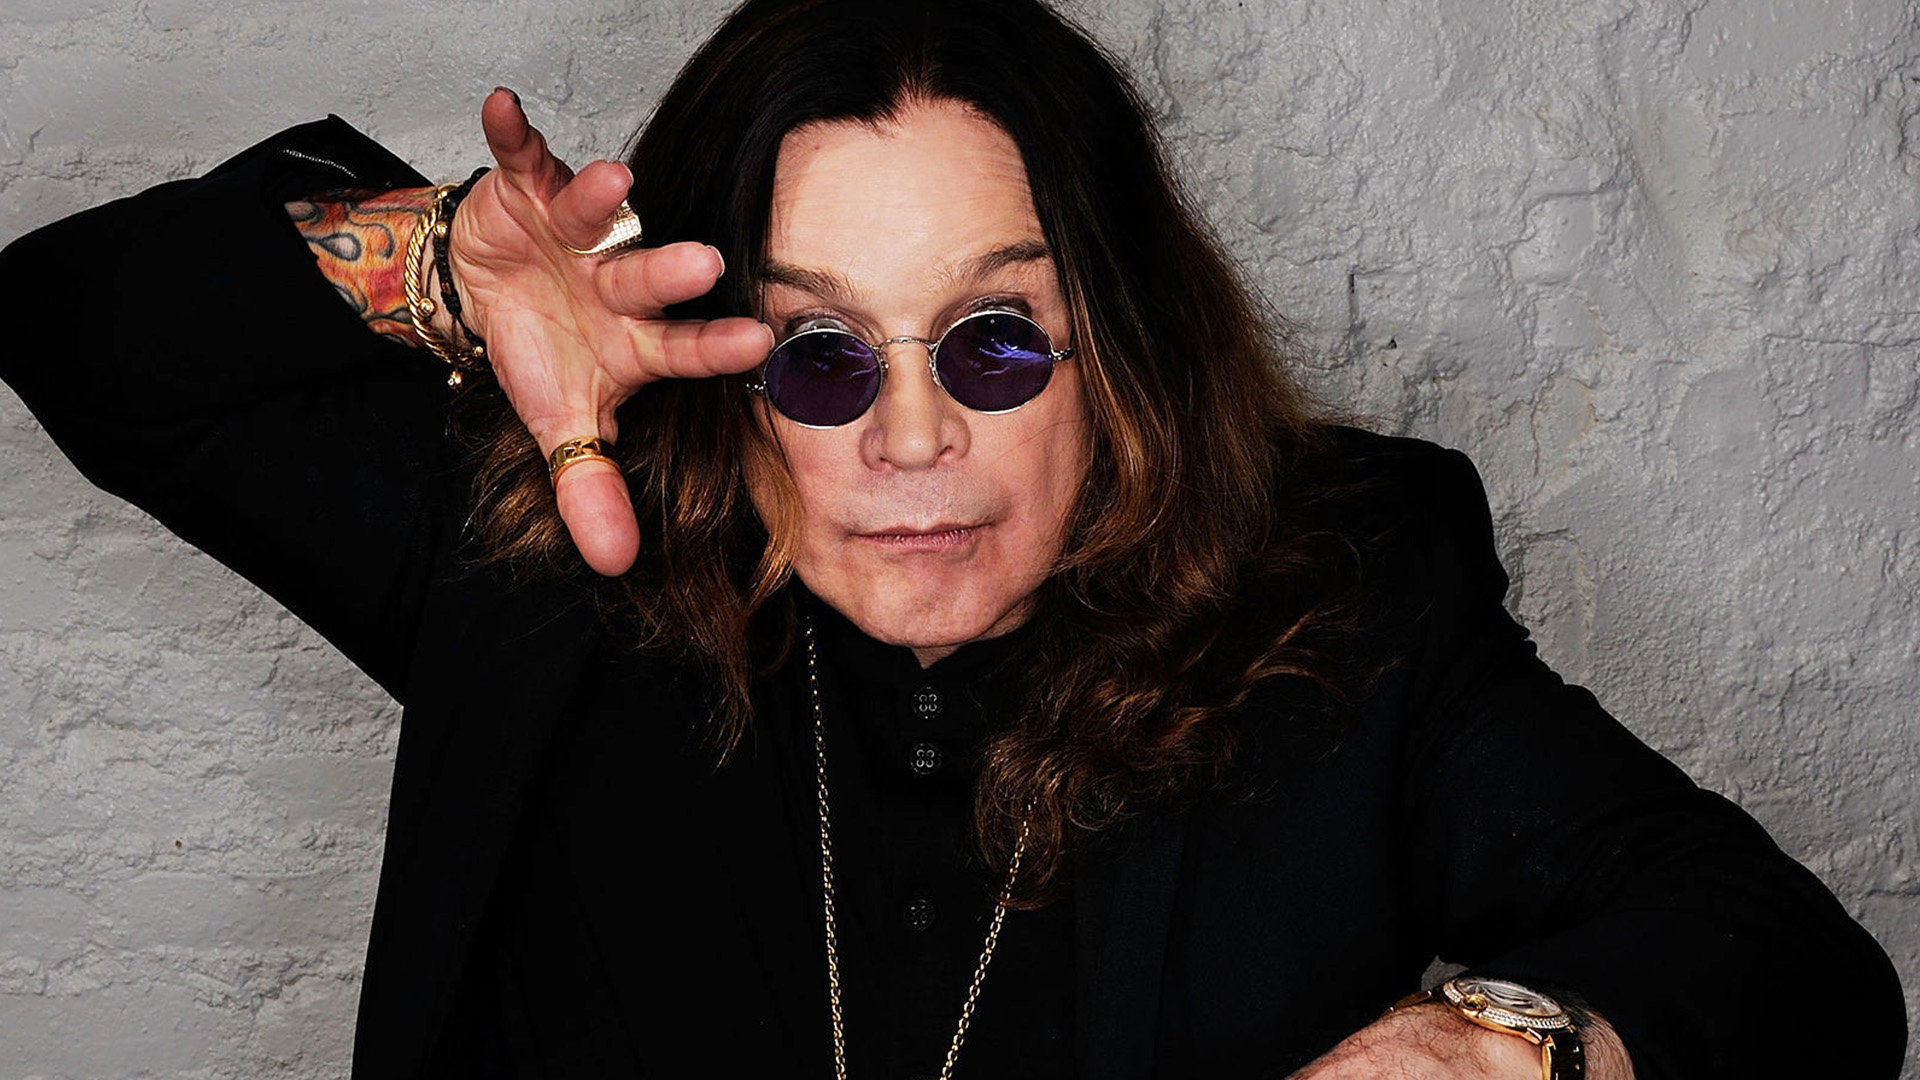 Download full hd 1920x1080 Ozzy Osbourne computer wallpaper ID:193895 for free